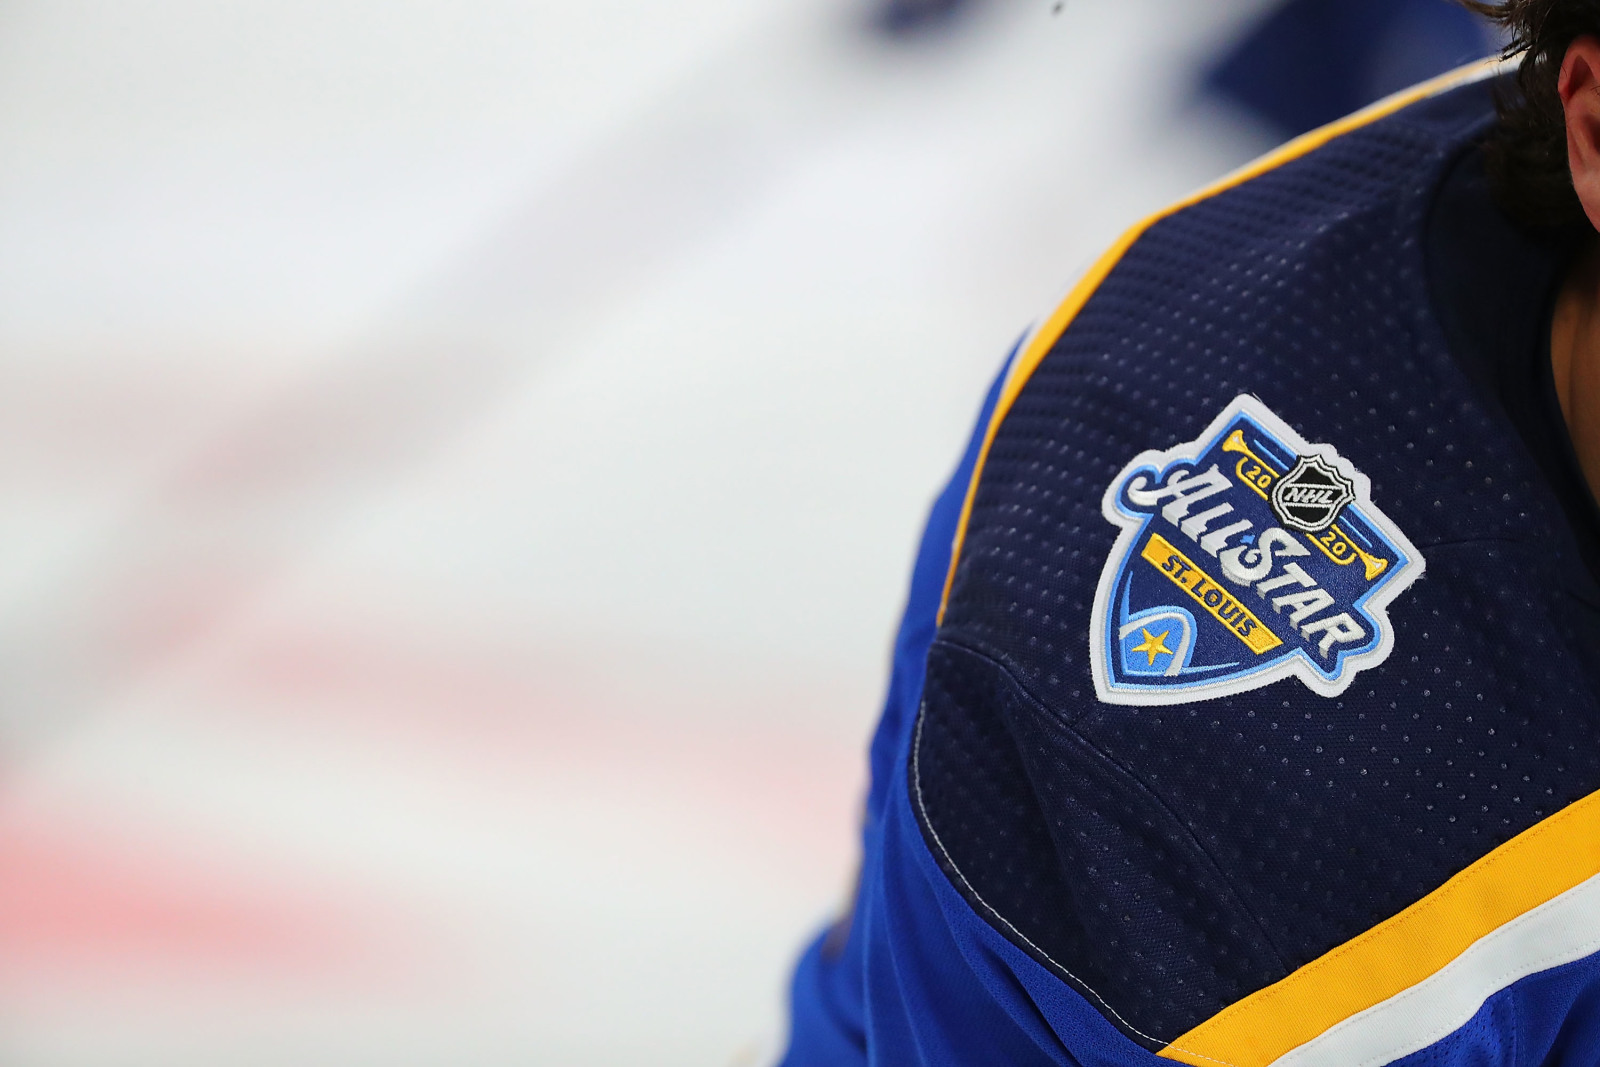 St. Louis Blues: All-Star Jerseys Are A Big Eye Sore